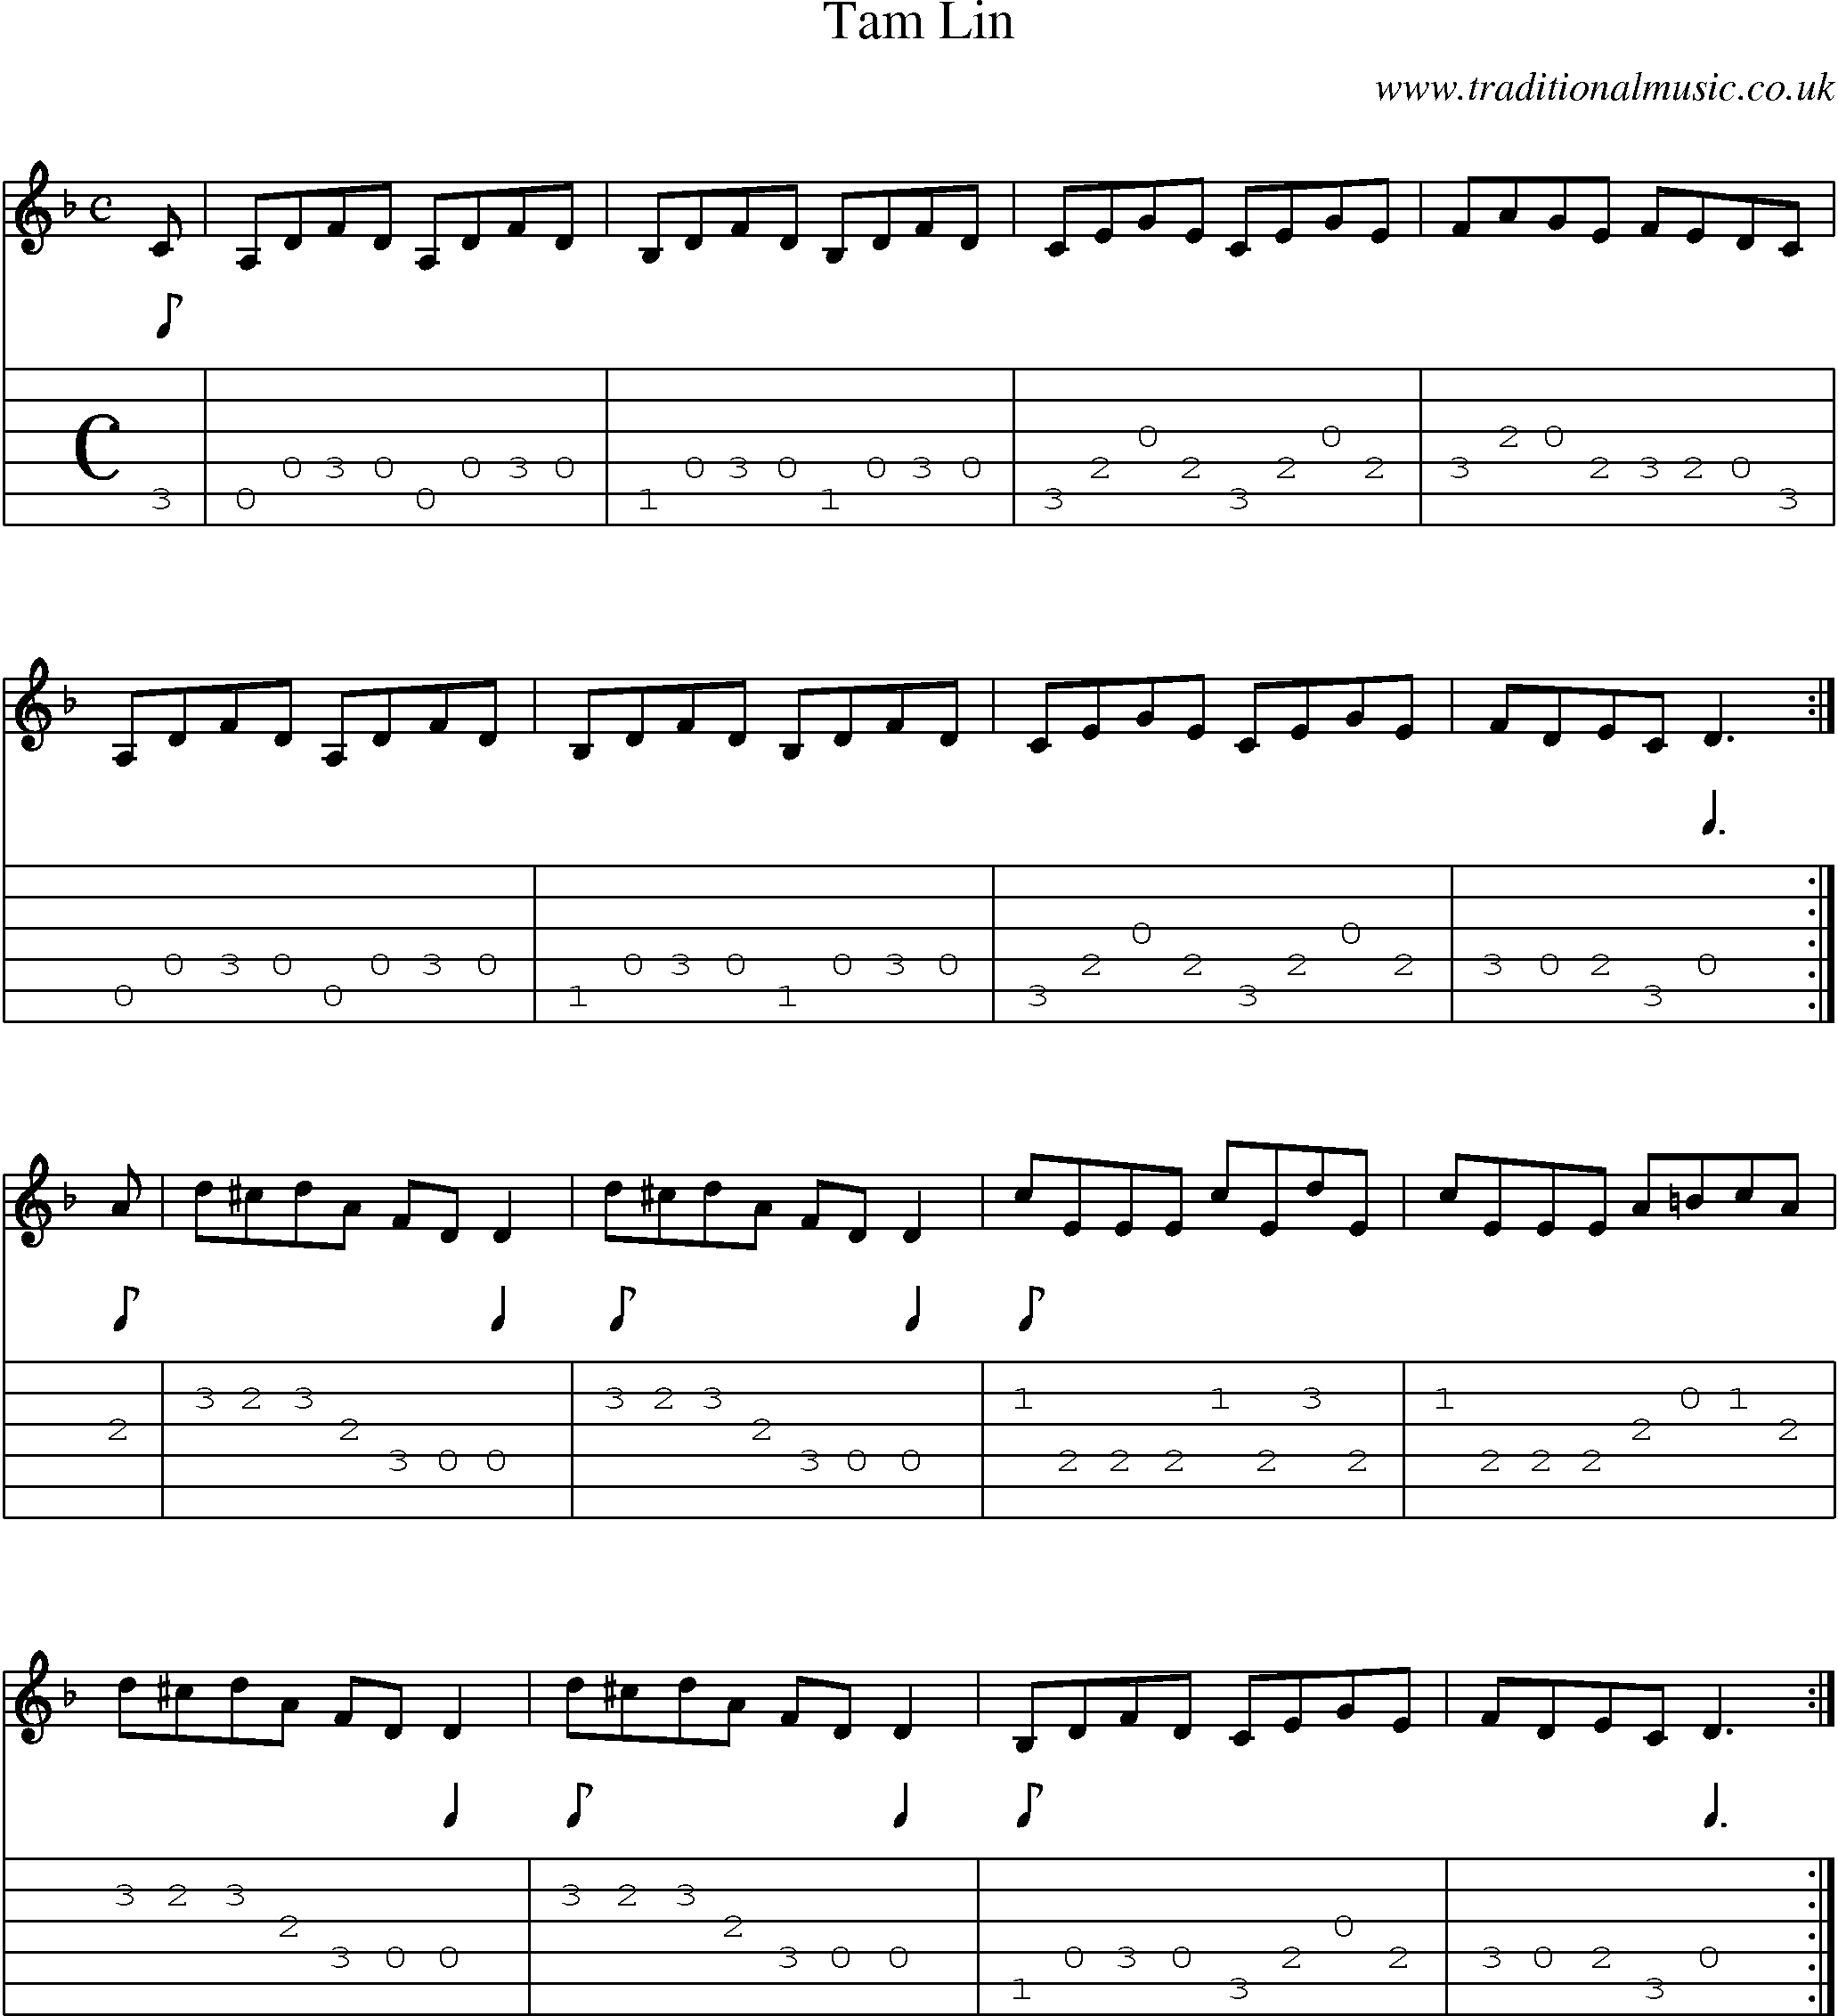 Music Score and Guitar Tabs for Tam Lin